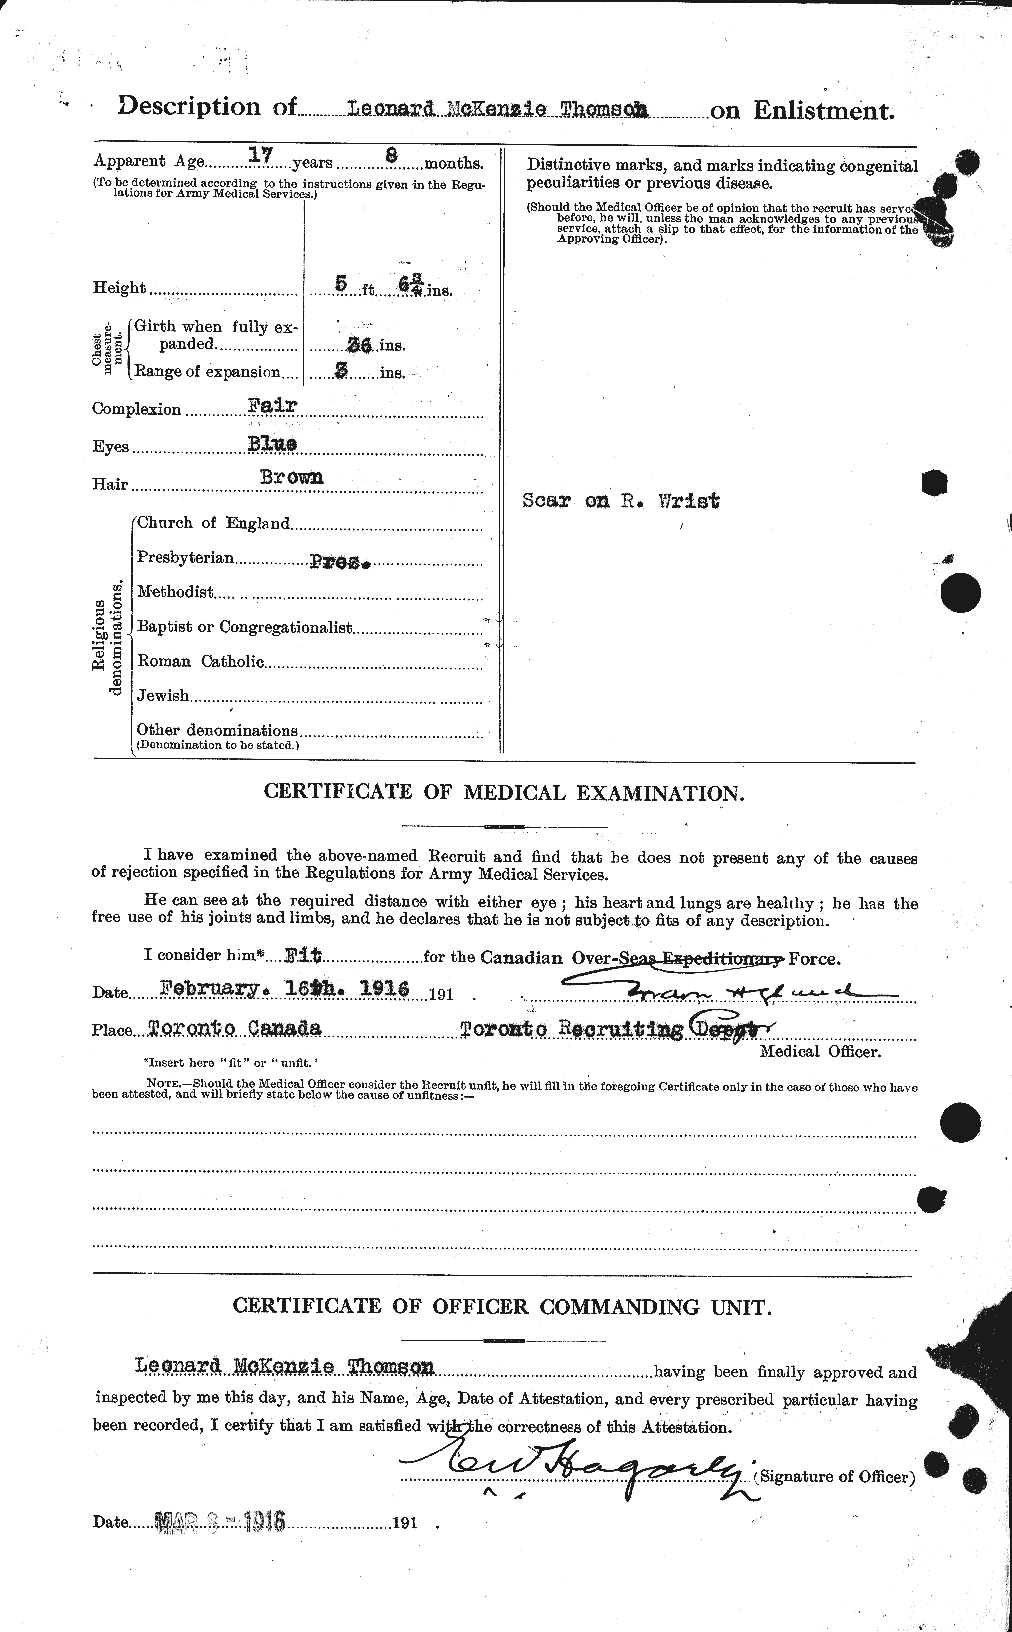 Personnel Records of the First World War - CEF 633441b